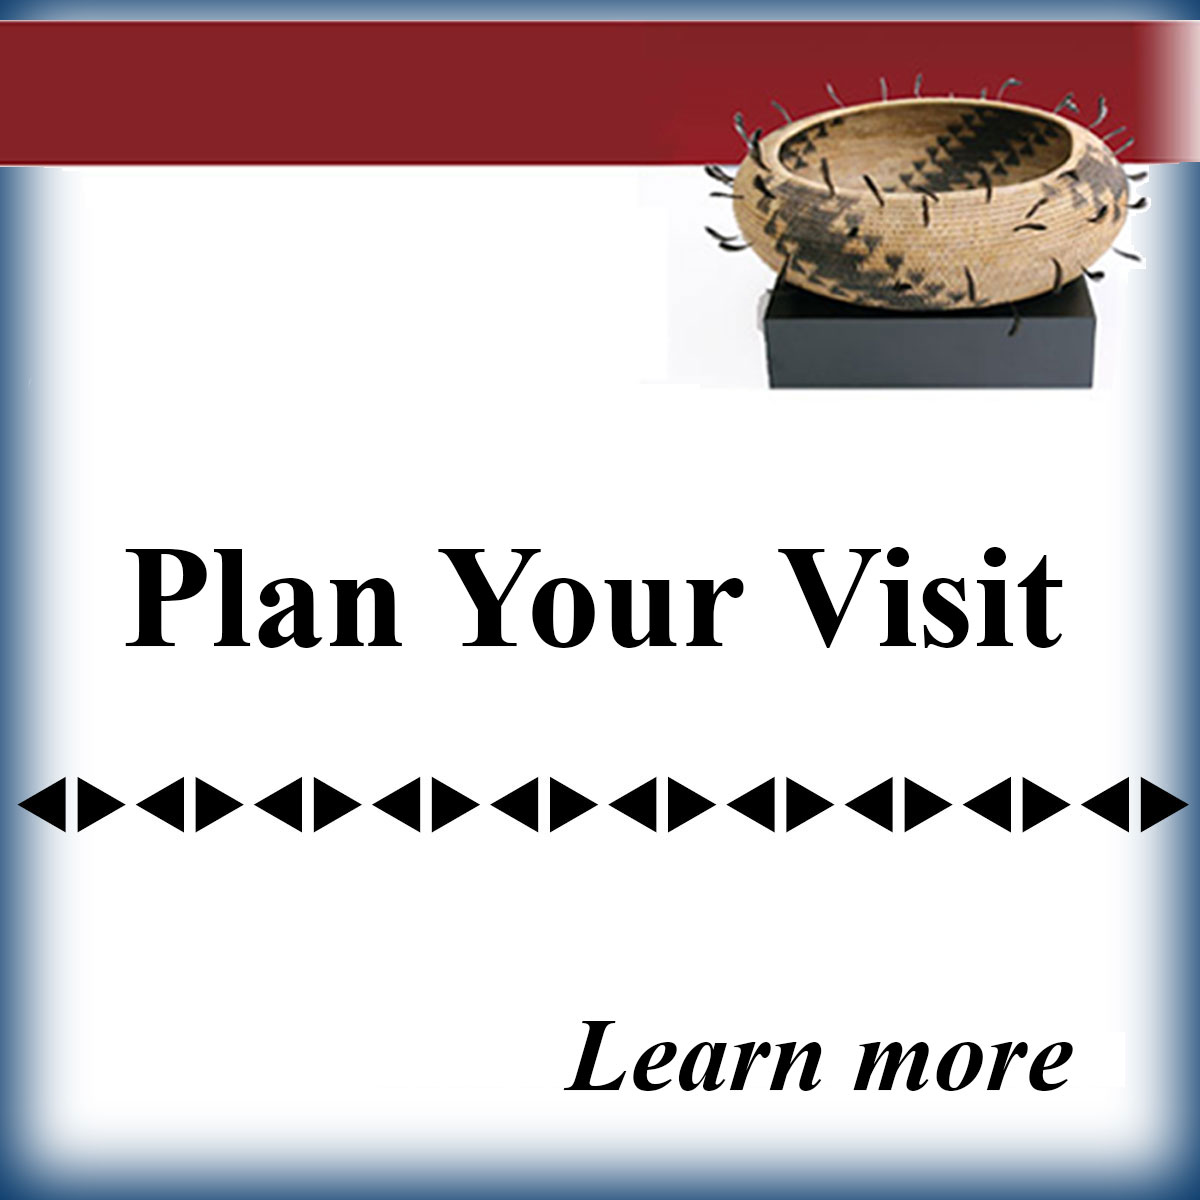 Plan Your Visit - Learn more